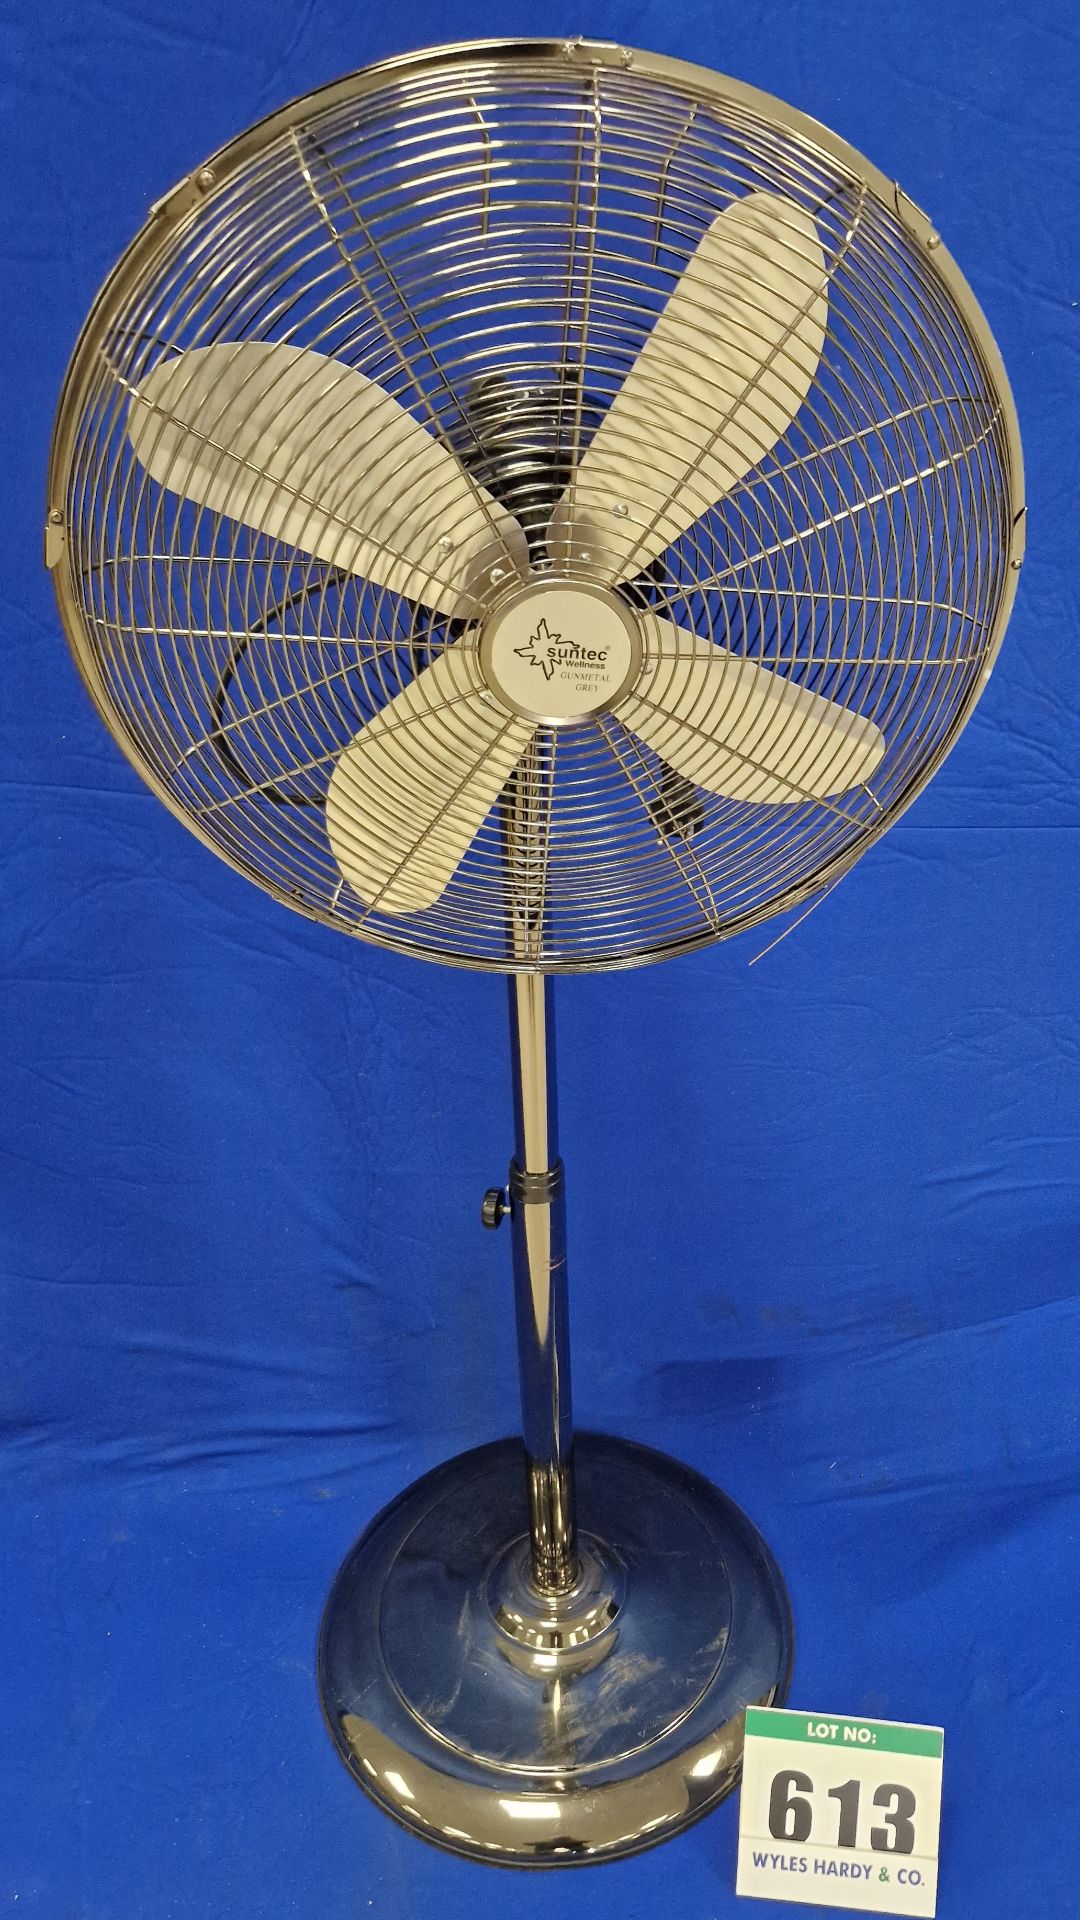 Five SUNTEC WELLNESS 18 inch 3-Speed Oscillating Electric Fans, 240V AC (Note: currently fitted with